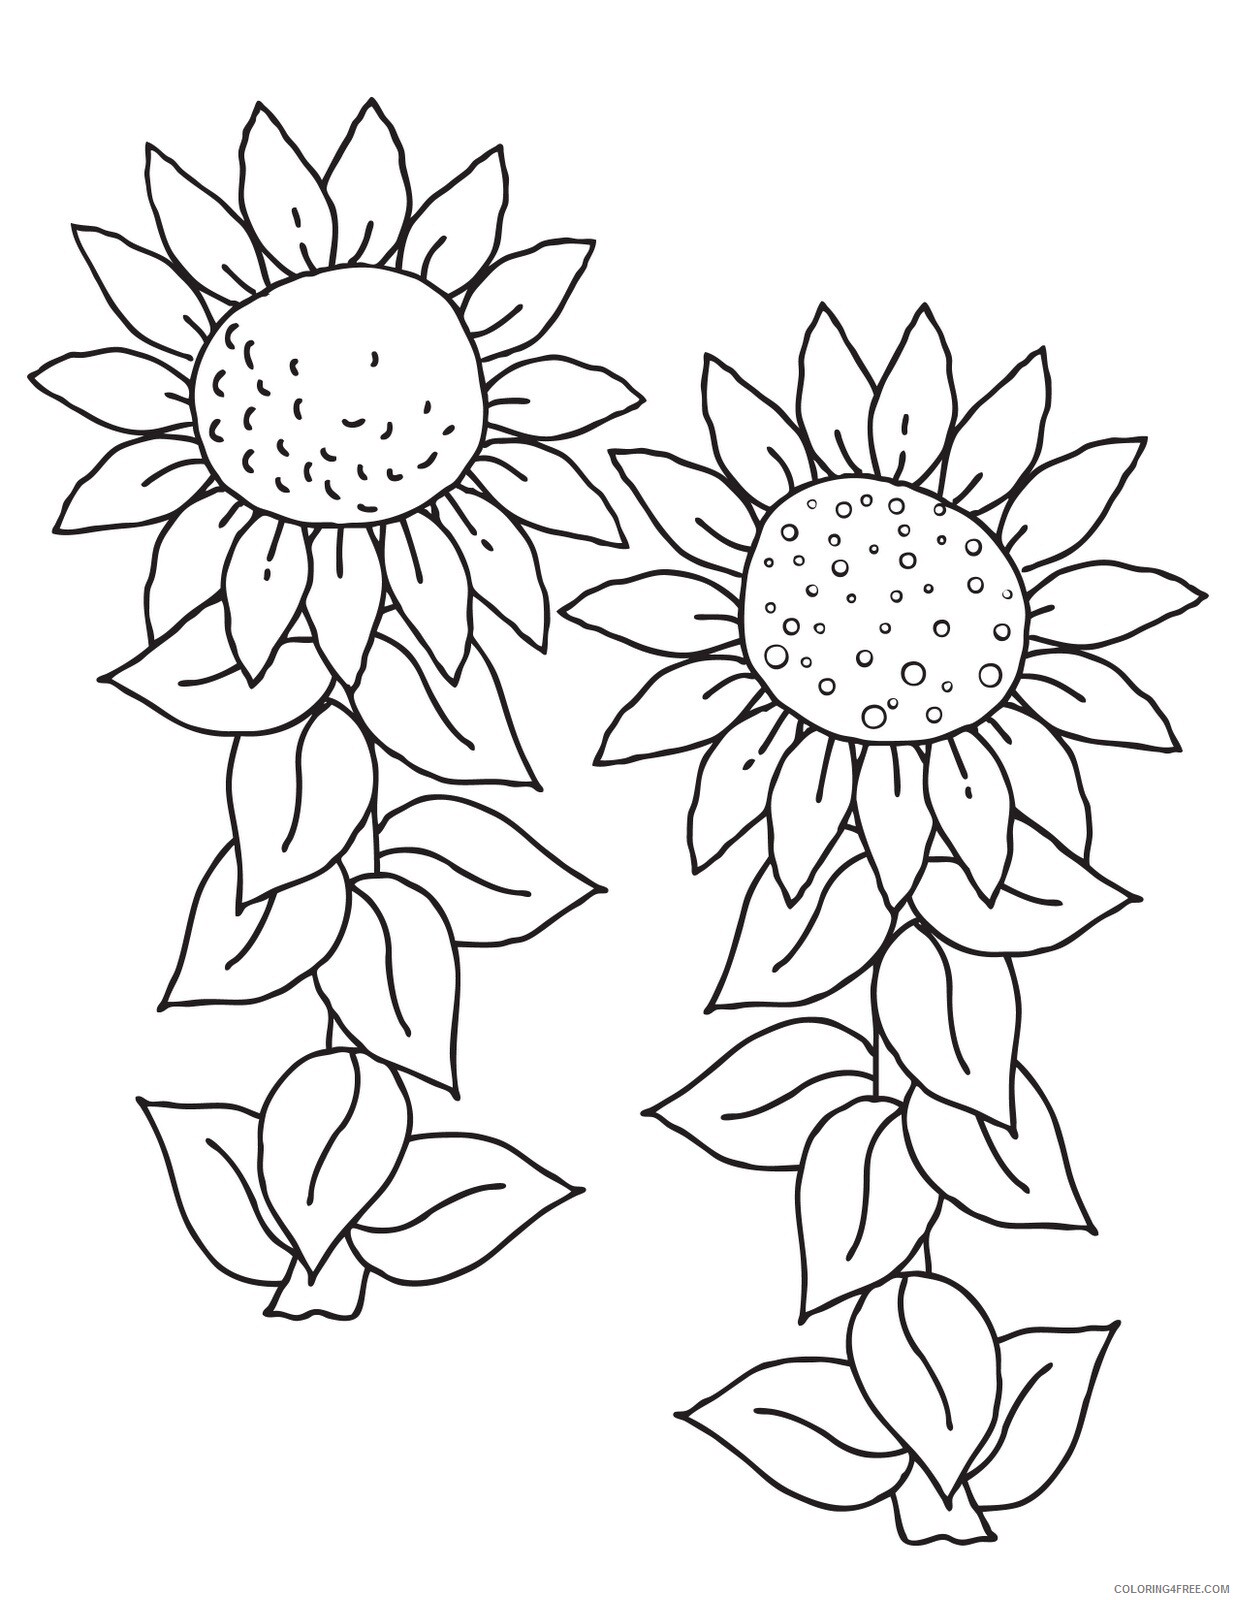 Sunflower Coloring Pages Nature Free Sunflower Printable 2021 729 Coloring4free